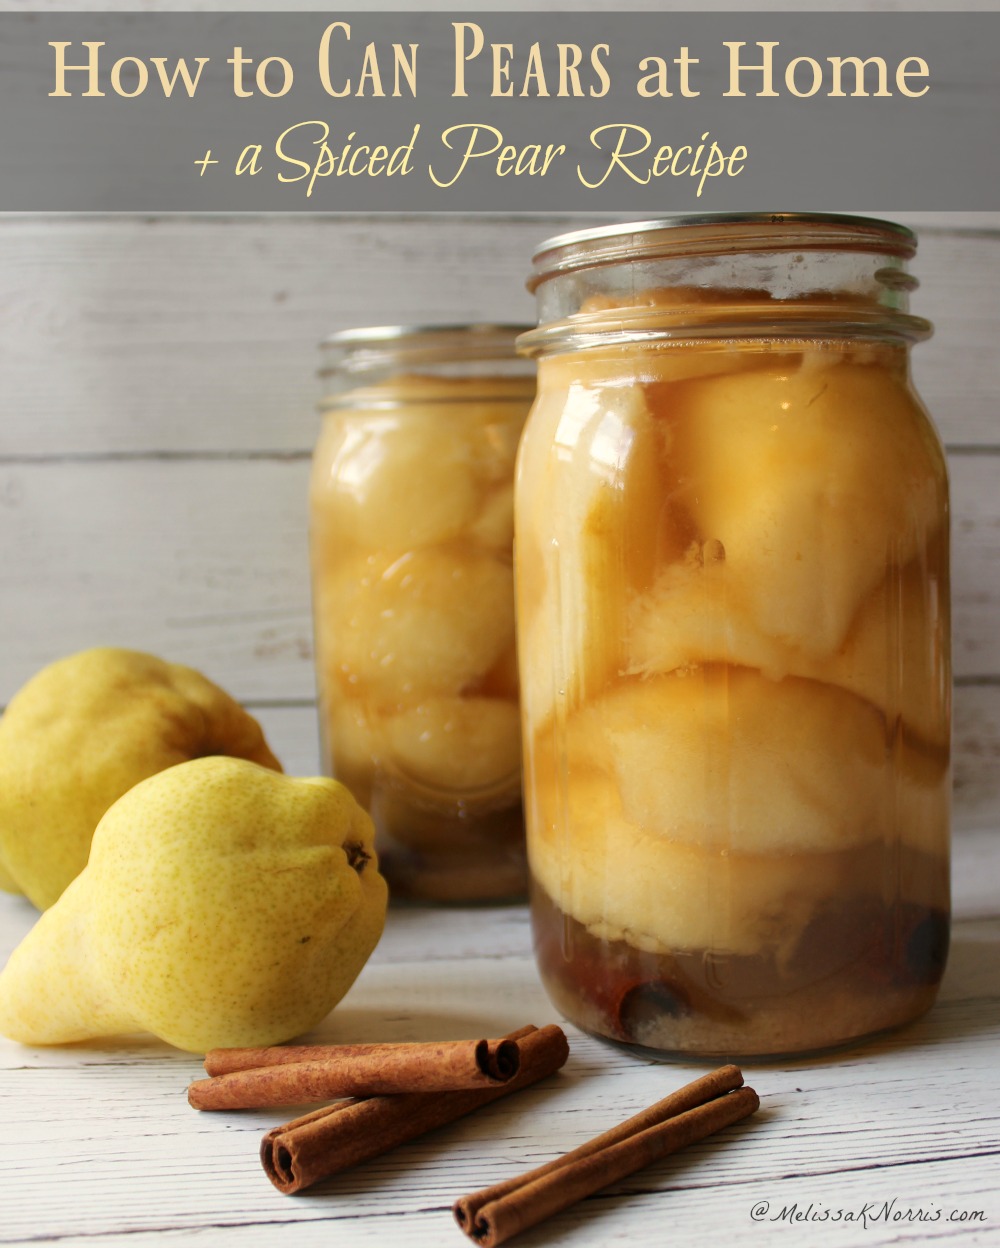 Two jars of canned pears with two pears and three cinnamon sticks sitting on a wooden surface. Text overlay says, "How to Can Pears at Home + a Spiced Pear Recipe".